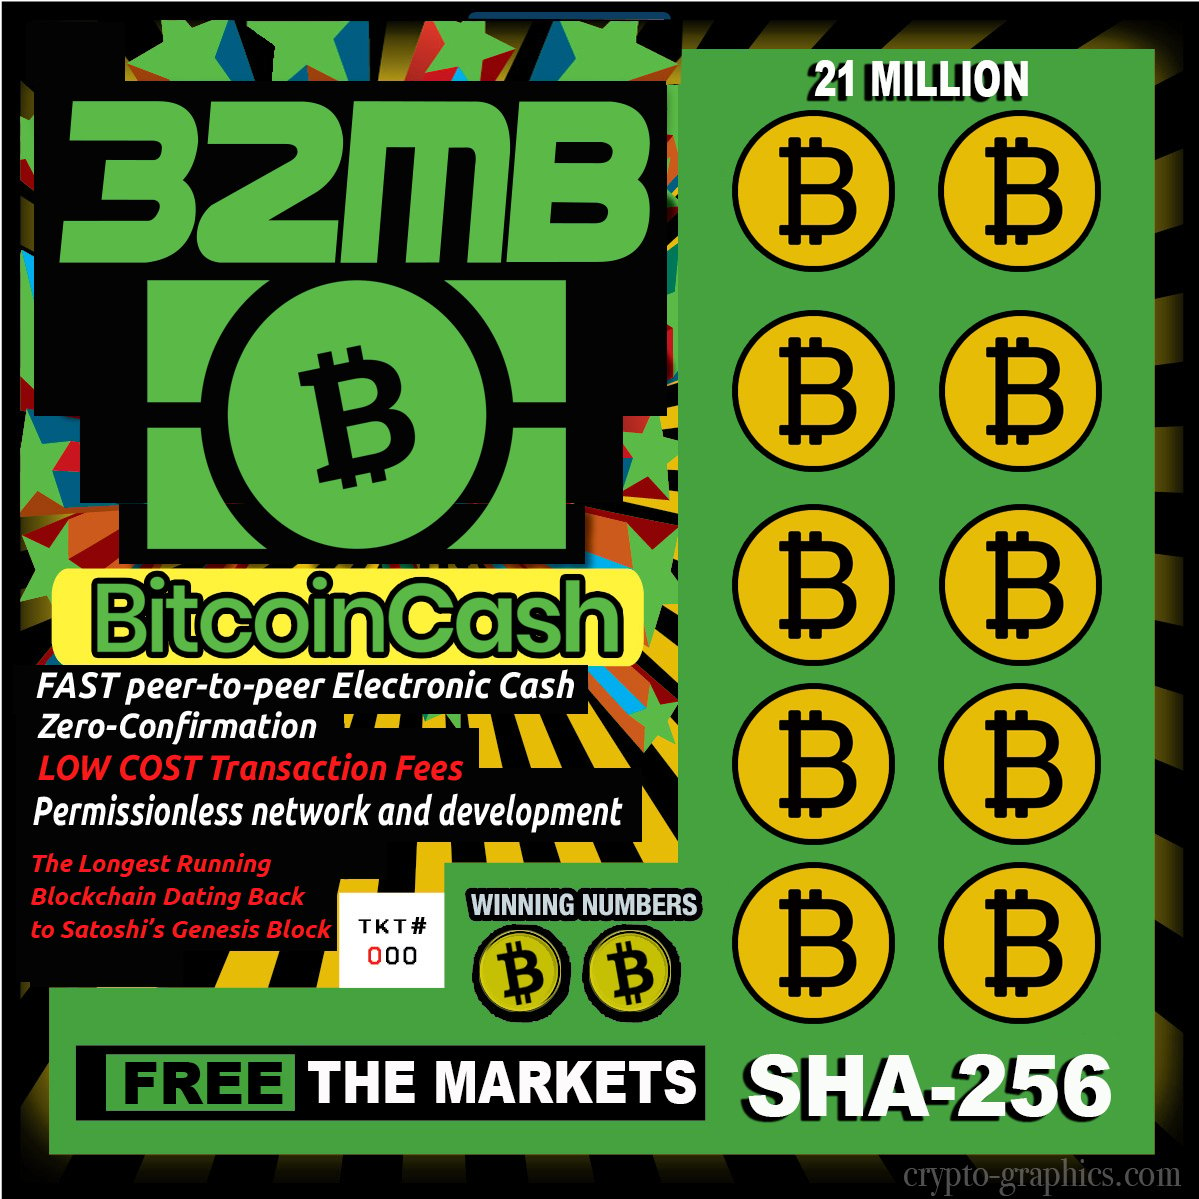 How to get free bitcoin cash from blockchain